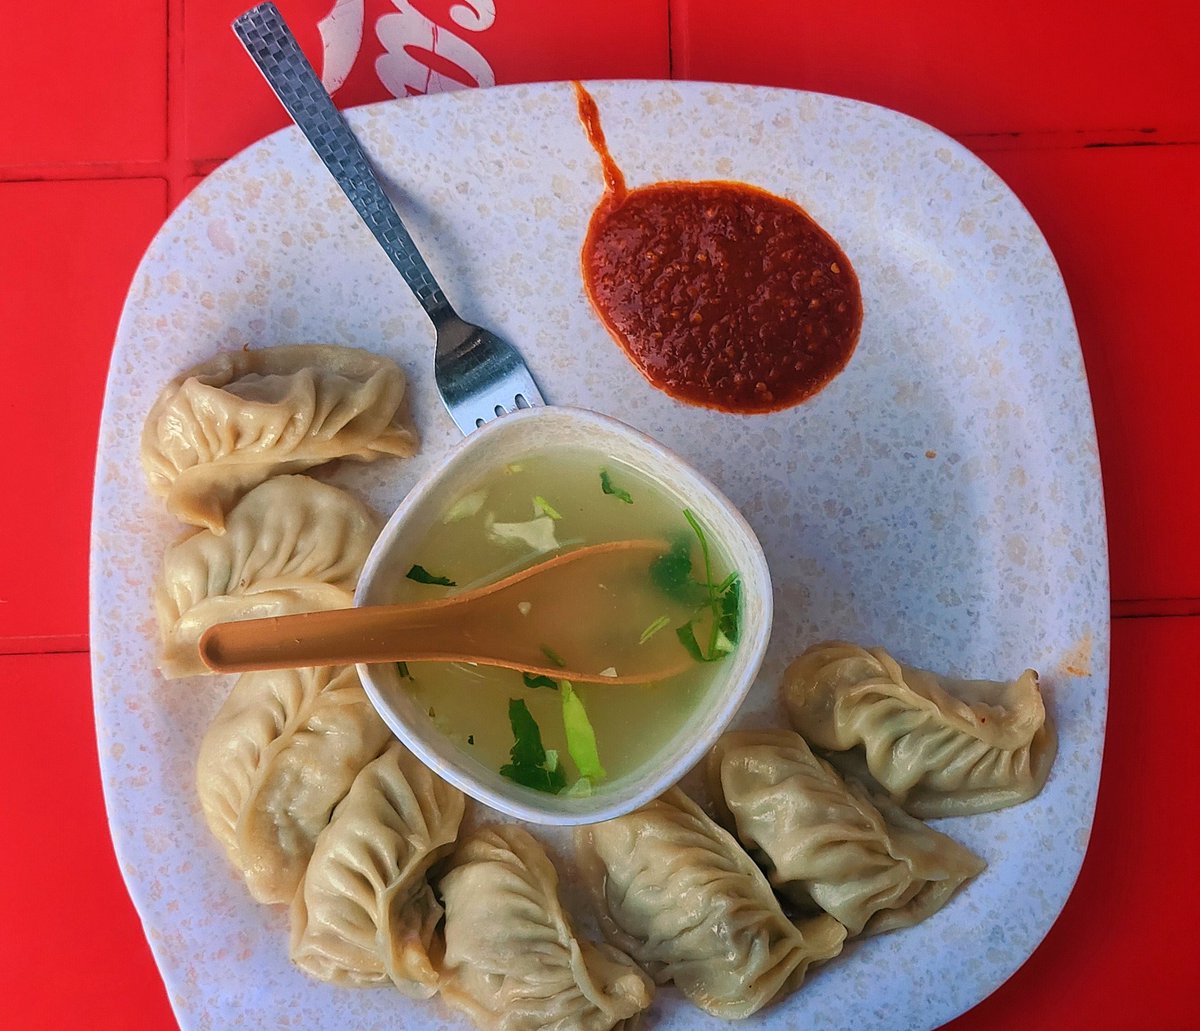 Every #Delhiite will know where these #momos are from ! 

#DelhiFood #Dilli